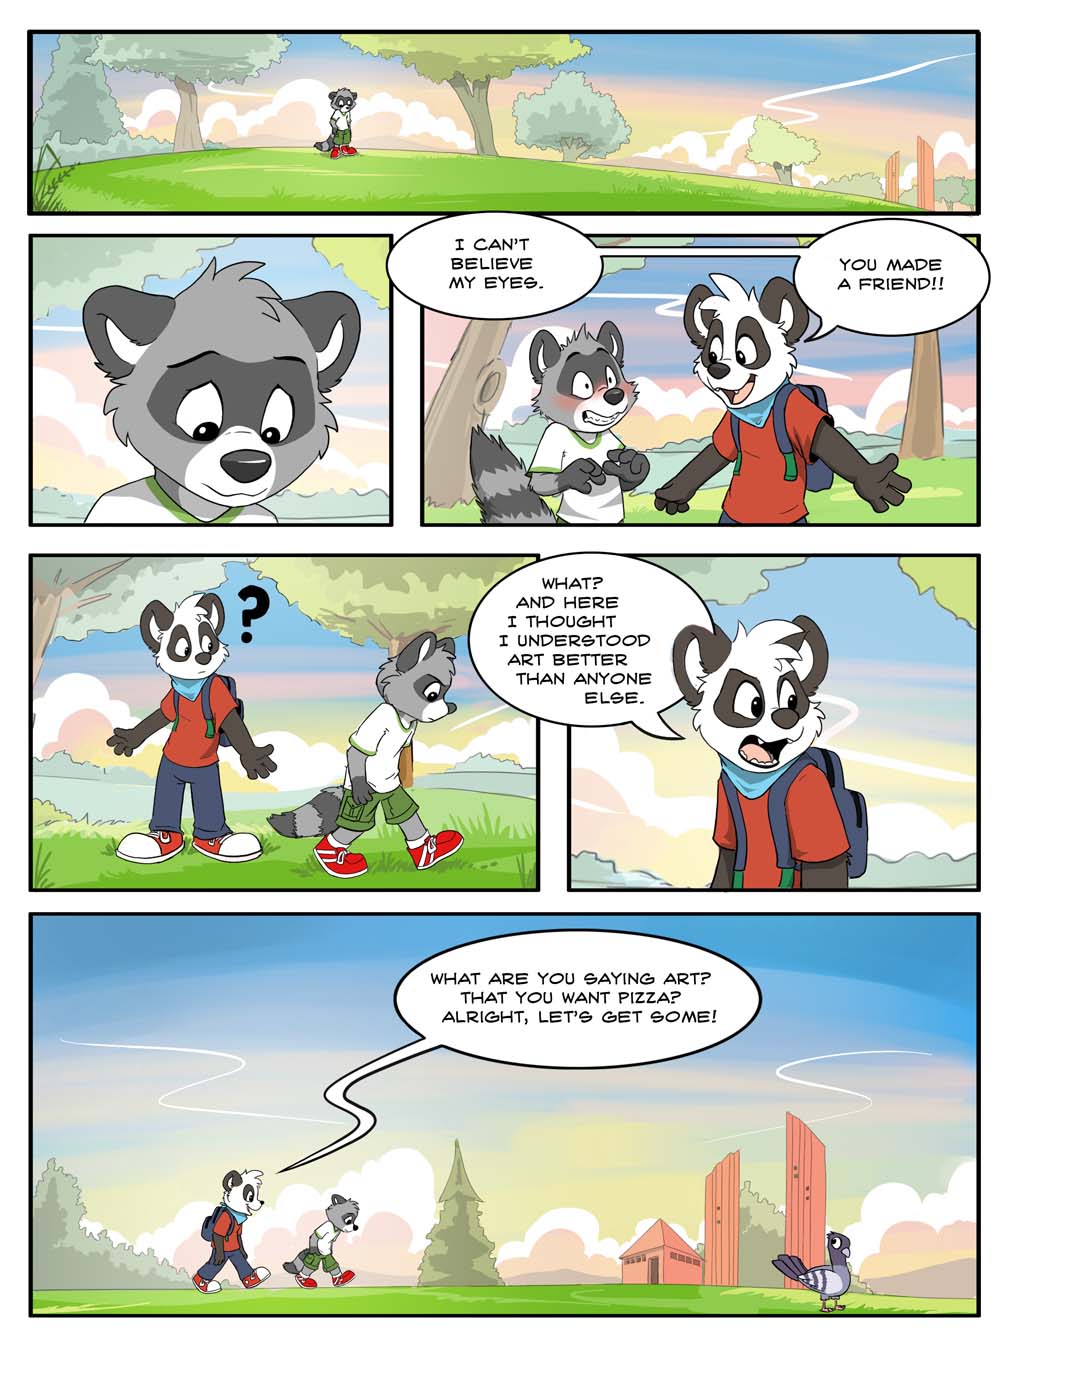 page 18